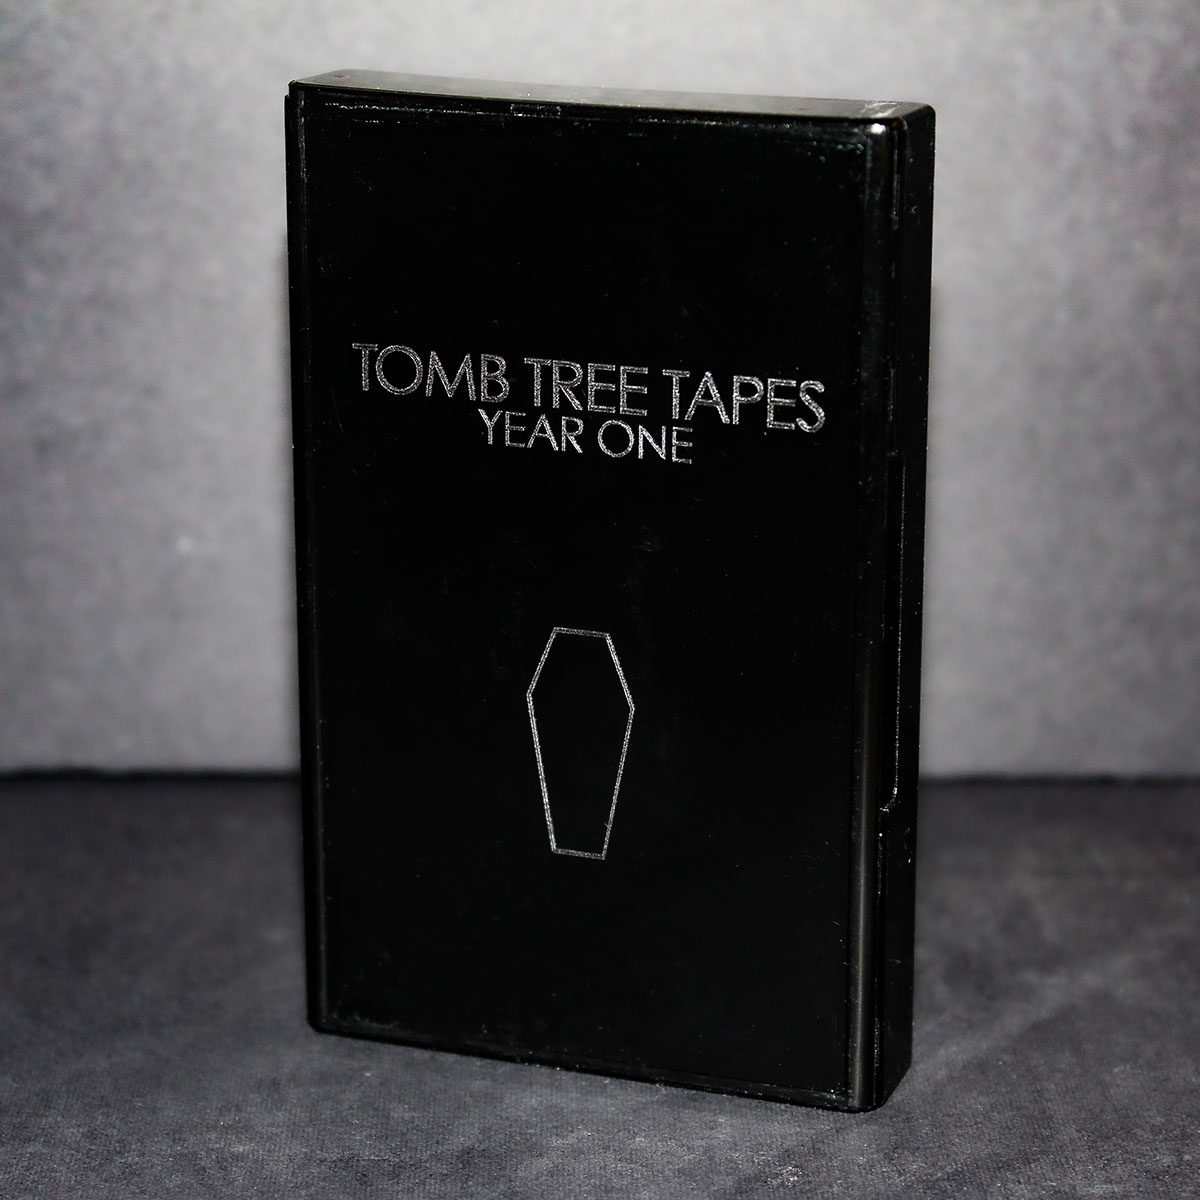 Laser Engraving On Audio Cassette Cases (Norelcos)